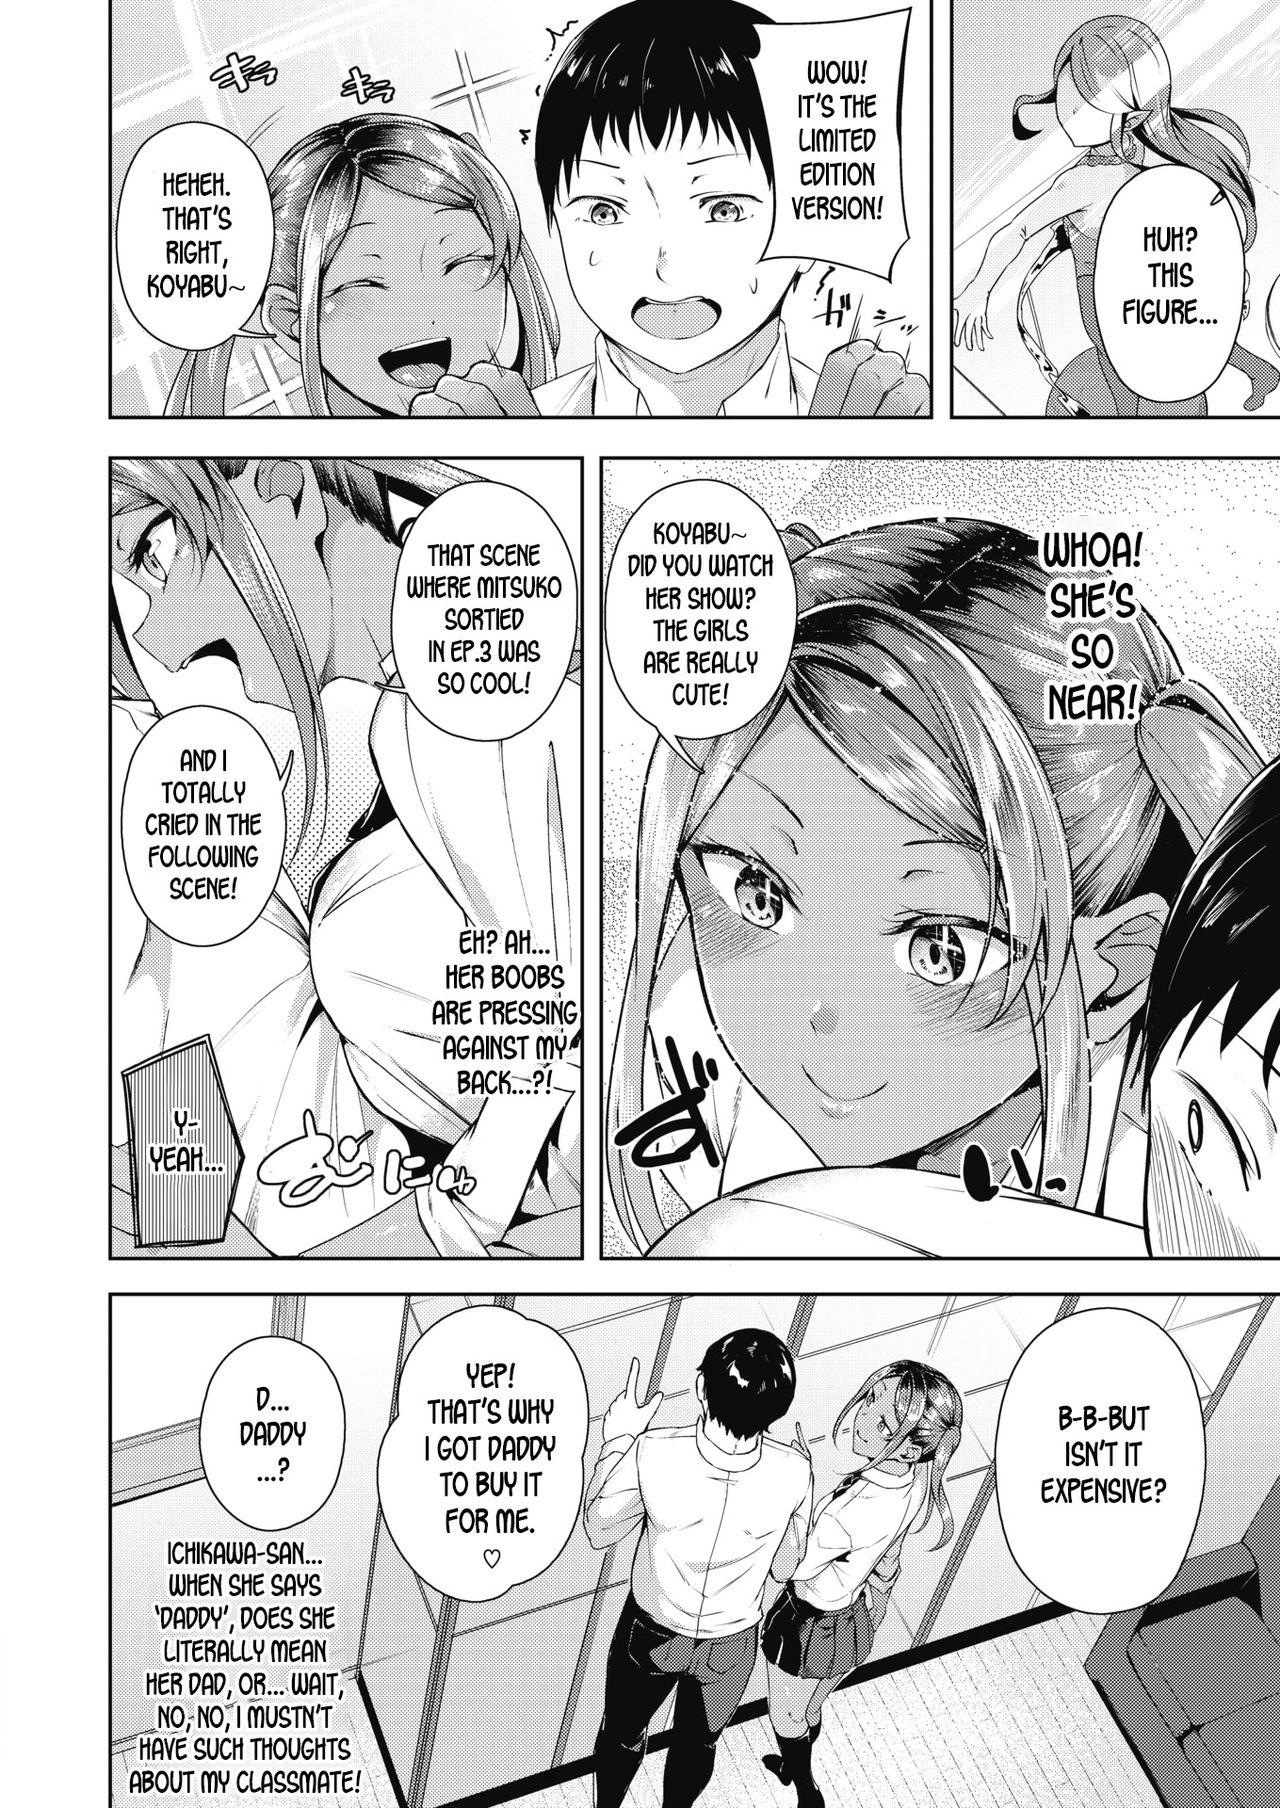 Grandma Class Caste Joui no Gal ga Layer Datta Ken | The Story Where the Gal in the Upper Caste of the Class Turns Out To Be a Cosplayer Erotica - Page 4